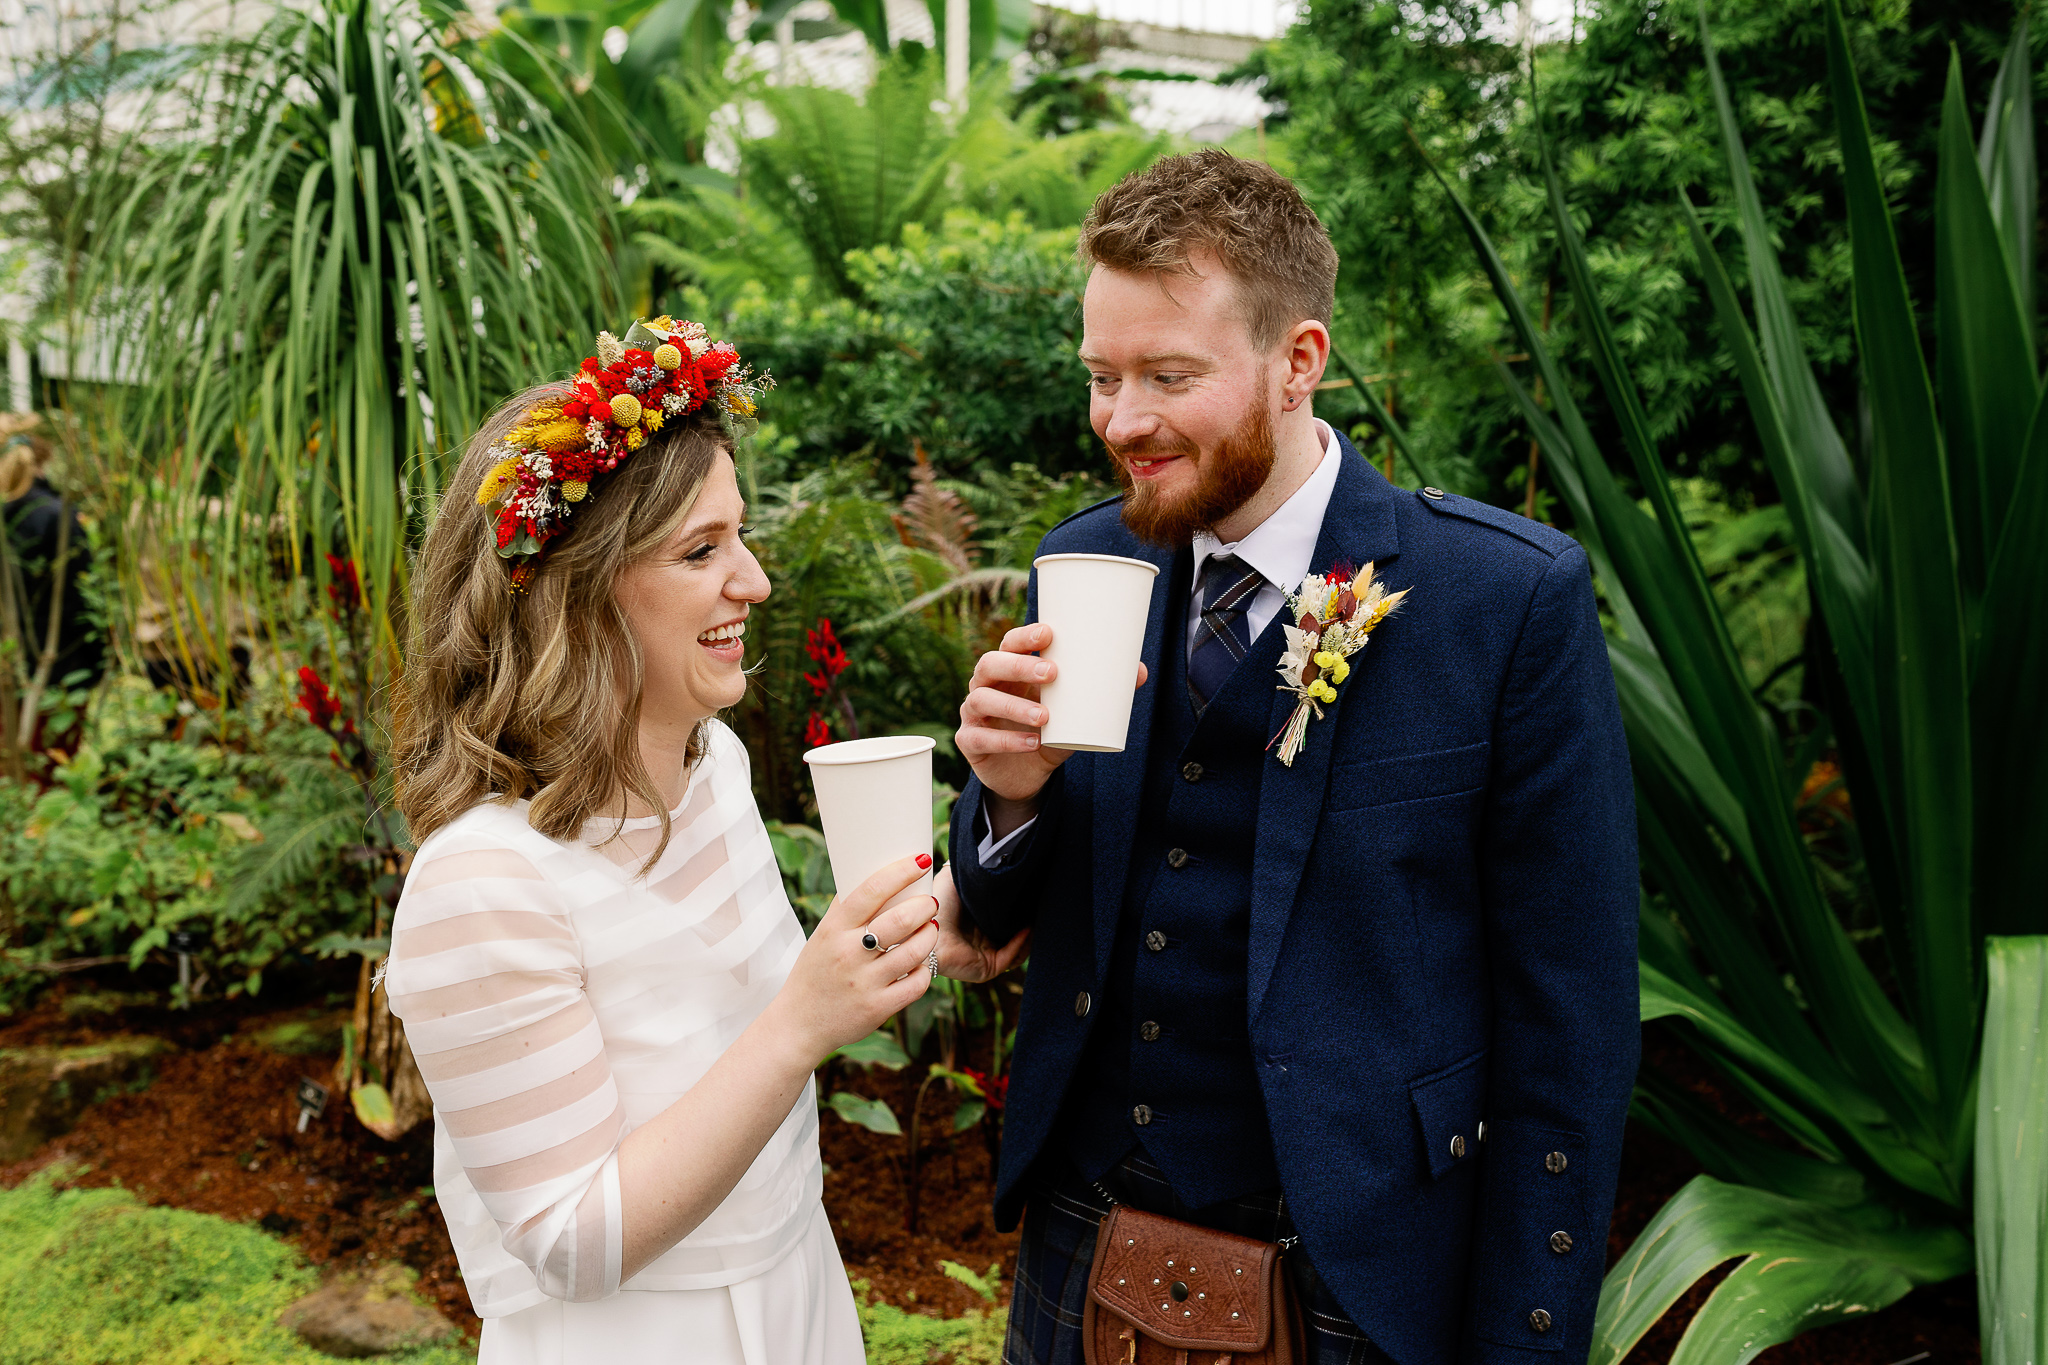 Happy and colourful Wedding Photography in Glasgow